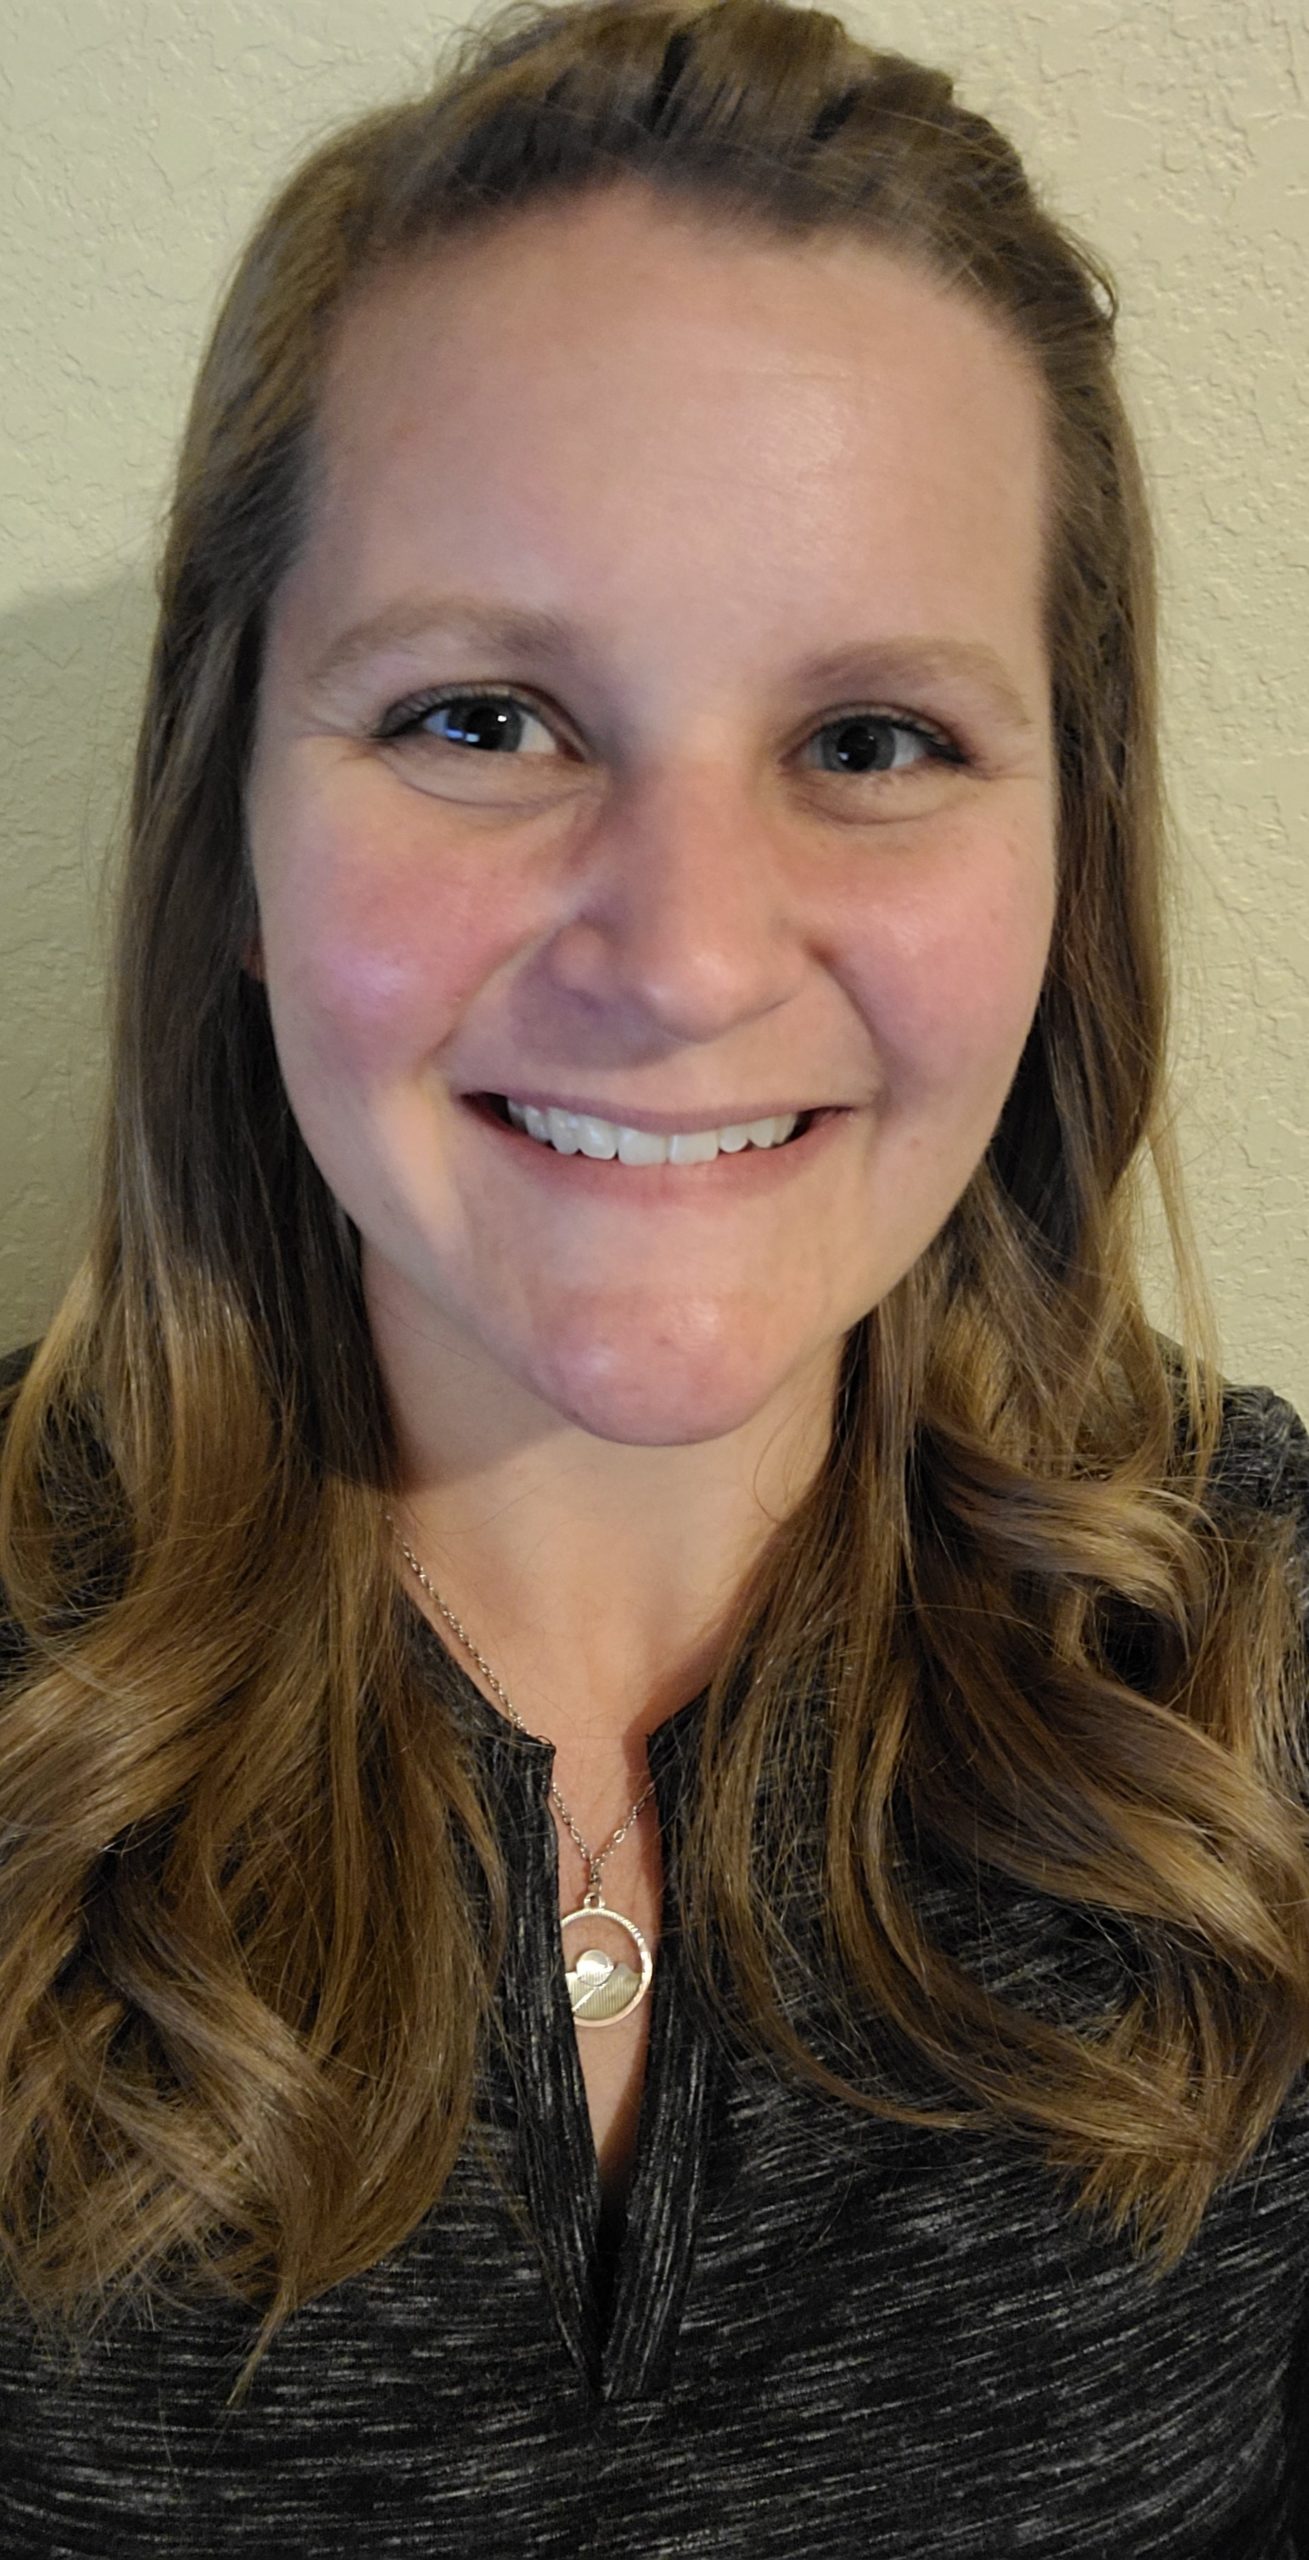 Molly Reichenborn : Graduate Student, New Mexico State University